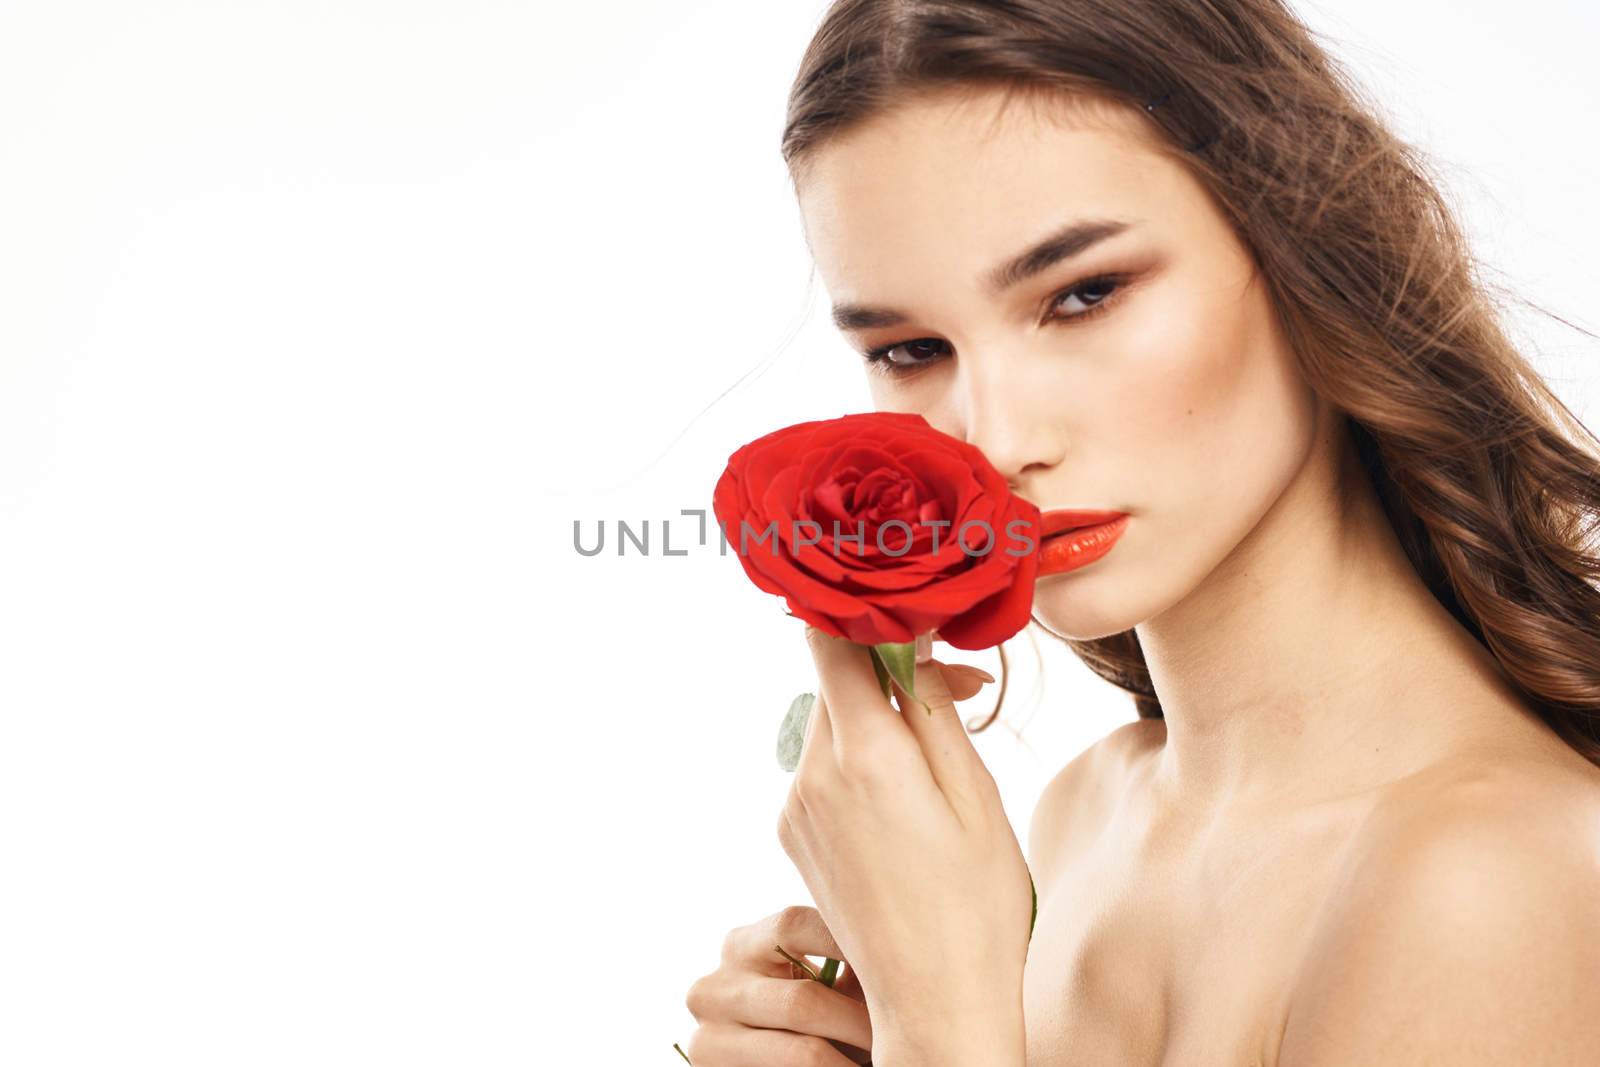 Woman with naked shoulders and red rose evening makeup light background. High quality photo